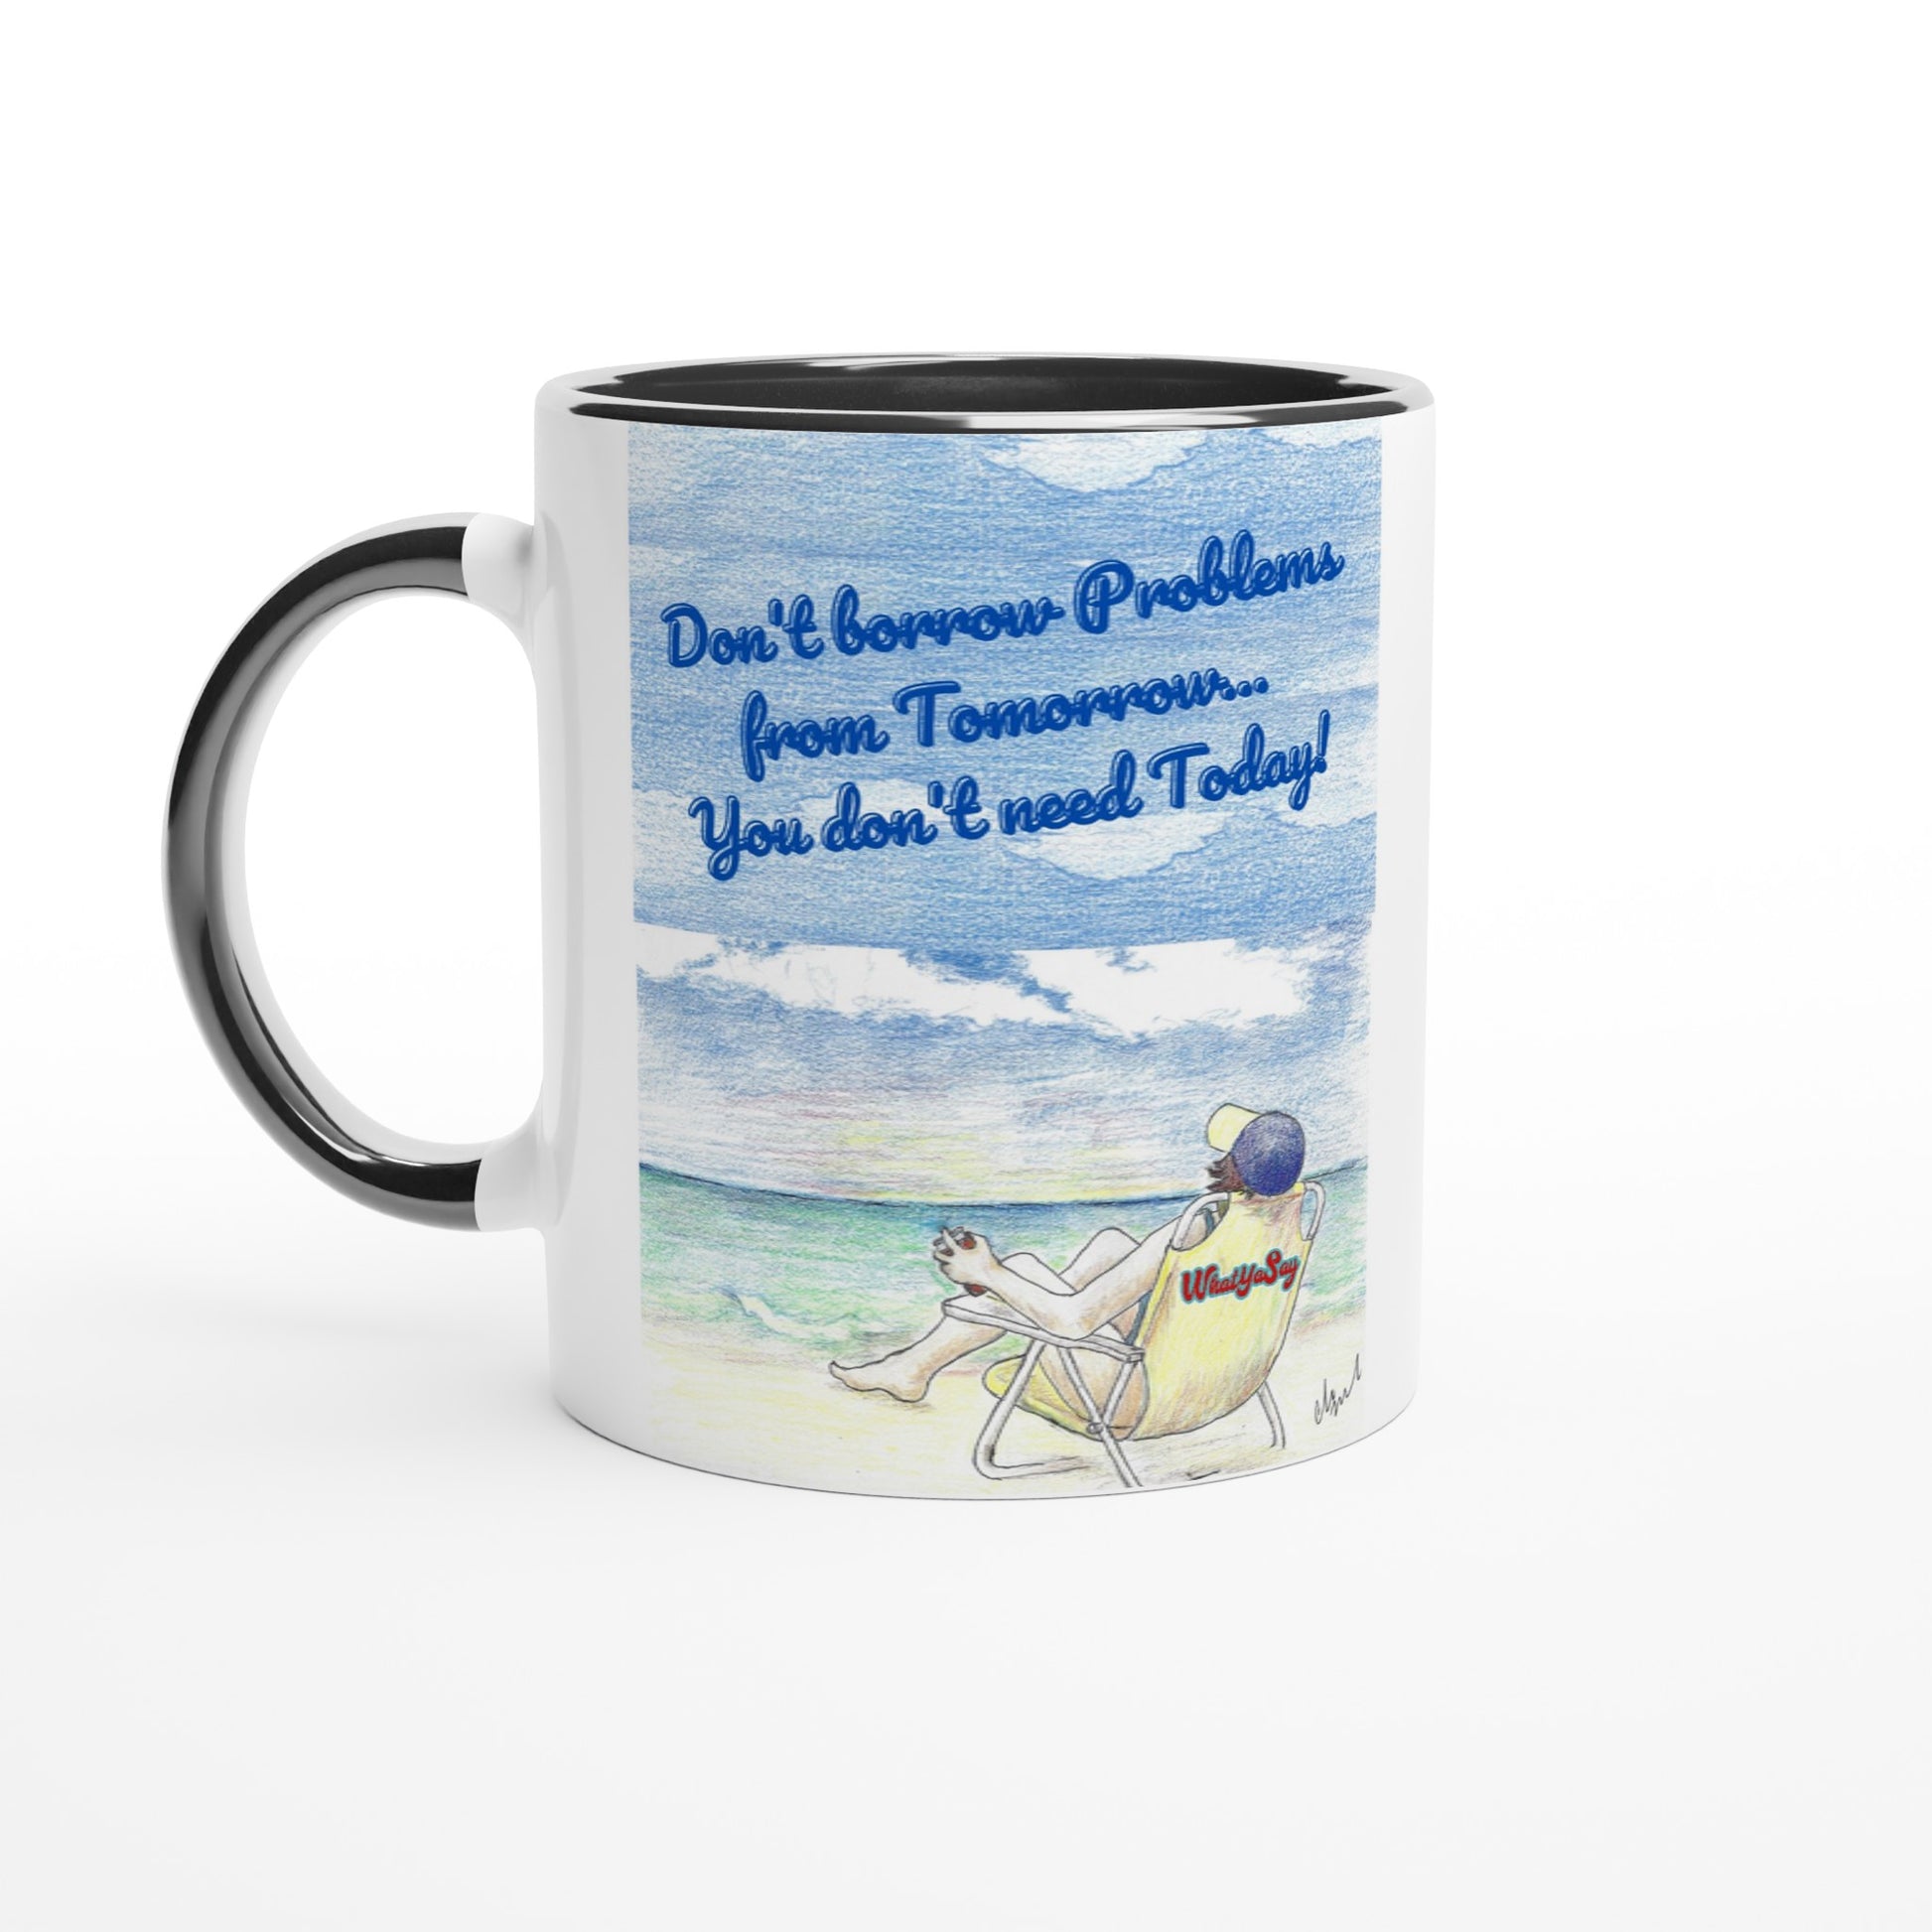 Funny saying Don't borrow Problems from Tomorrow... You don't need Today! on front and WhatYa Say logo on back 11oz white ceramic mug with black handle, rim and inside and coffee mug is dishwasher safe and microwave safe.